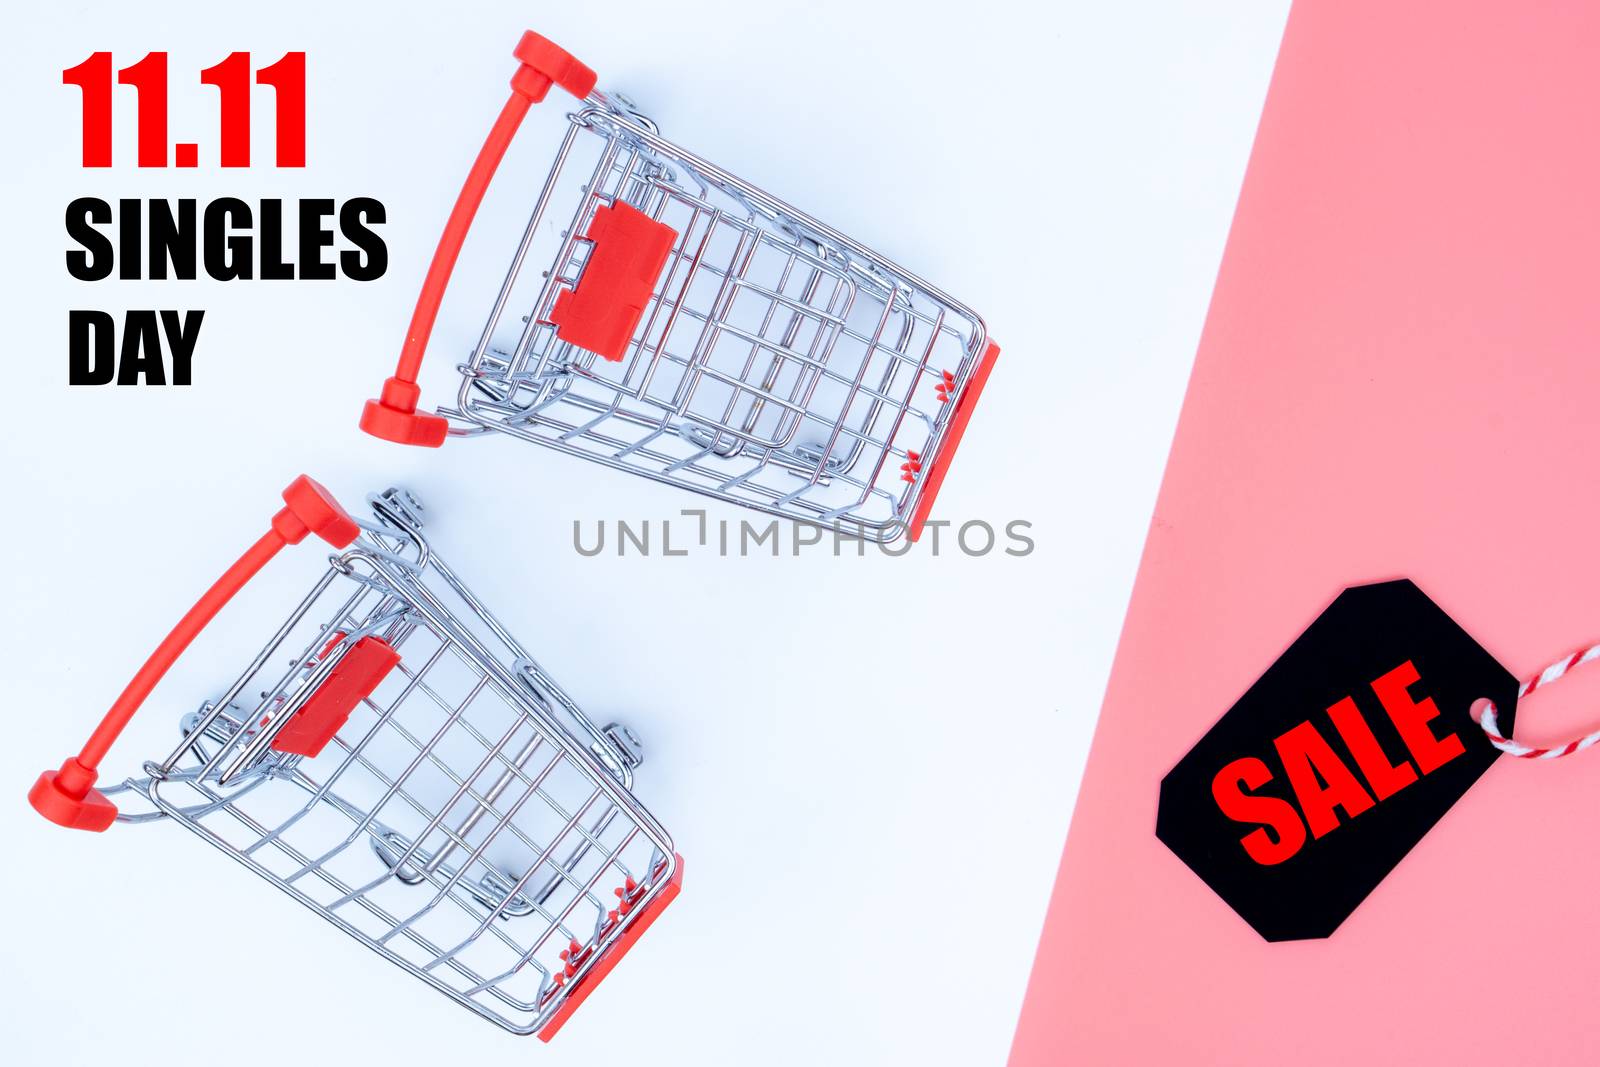 Online shopping of China, The shopping cart and Christmas boxes and shopping tag on a pink and white background with copy space for text. 11.11 single's day sale concept